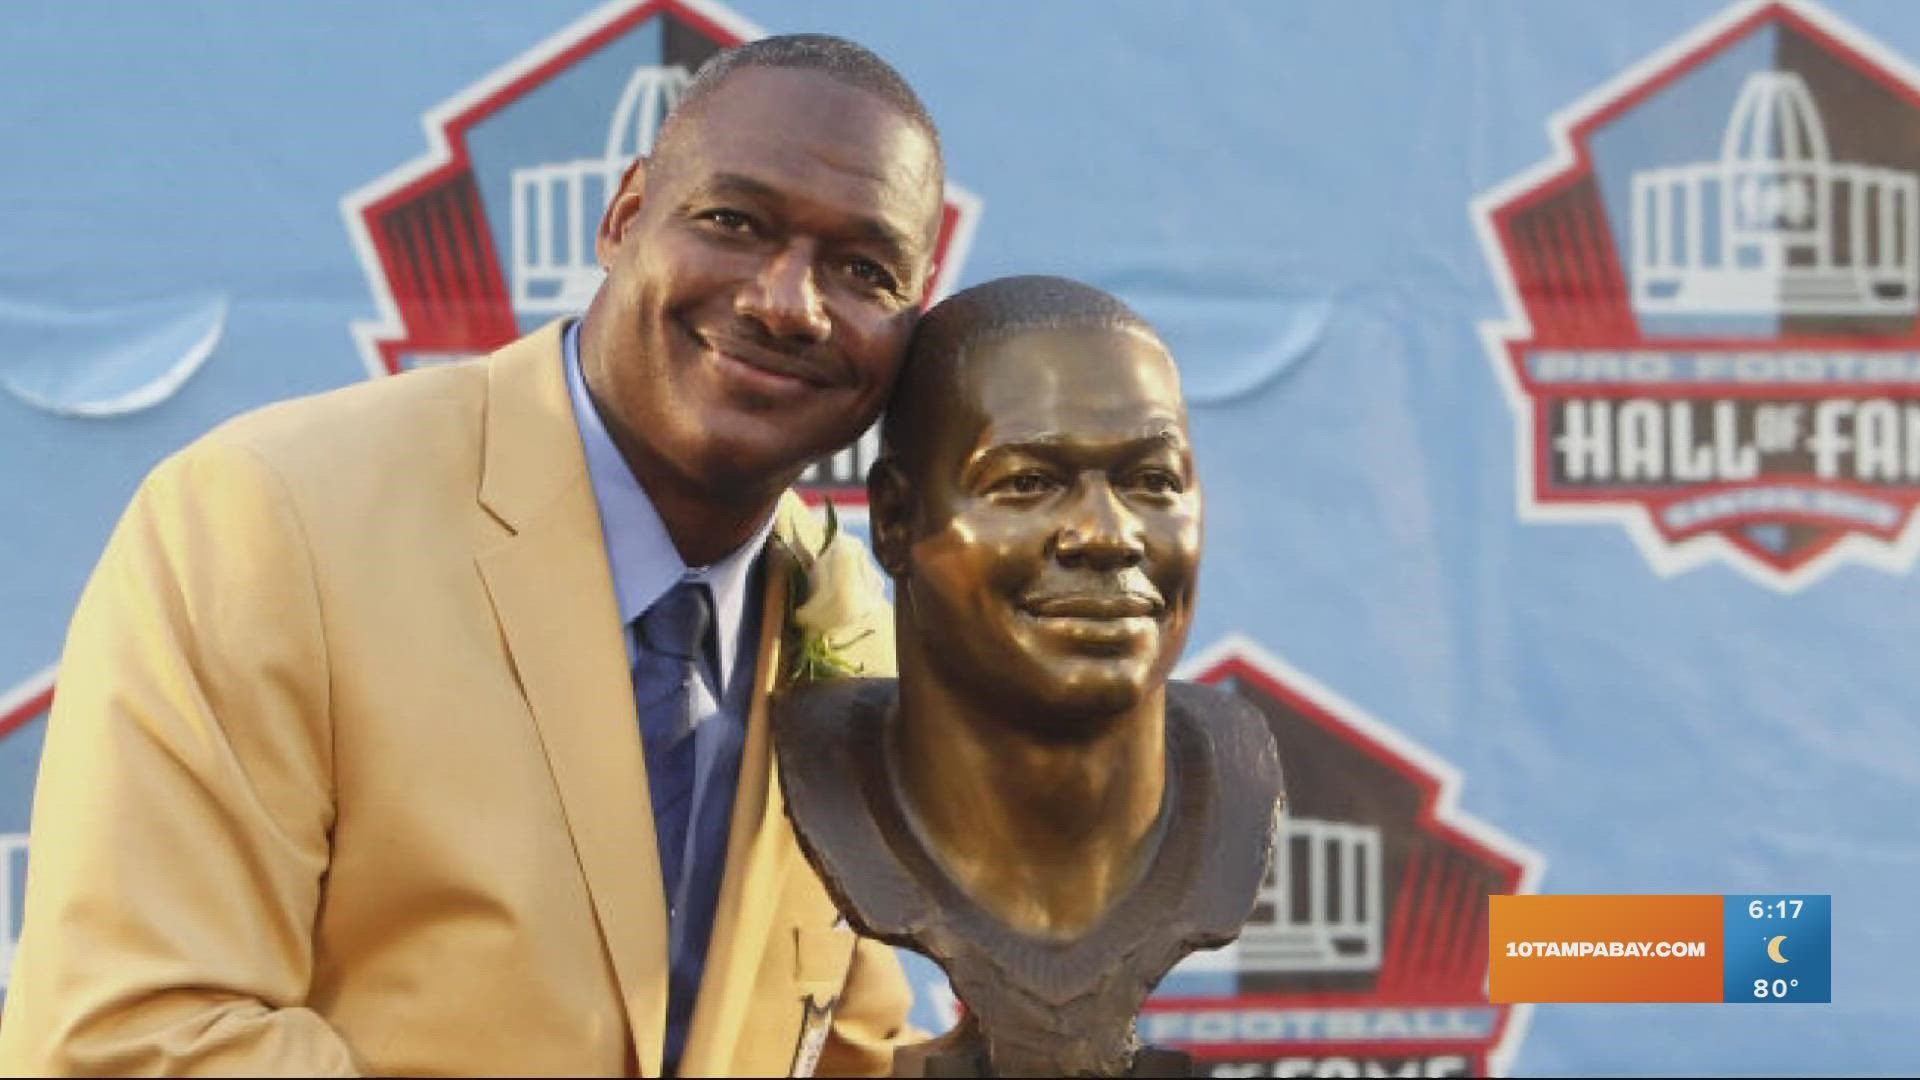 Derrick Brooks still serves the Tampa Bay area, now off the field